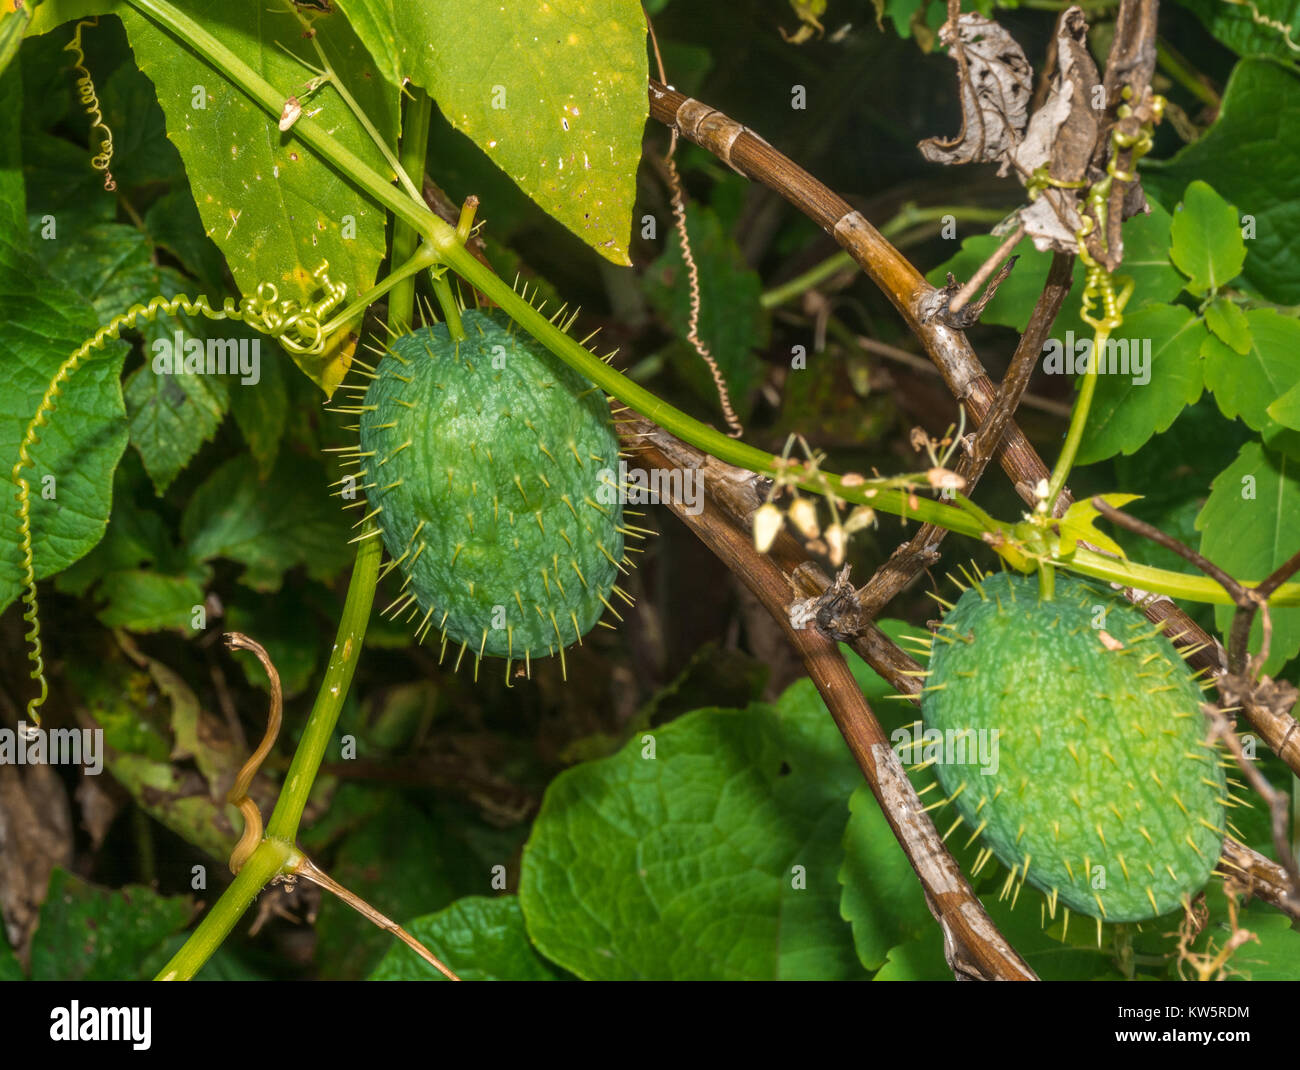 Echinocystis, known as Wild Cucumber, Balsam-Apple or Prickly Cucumber Stock Photo